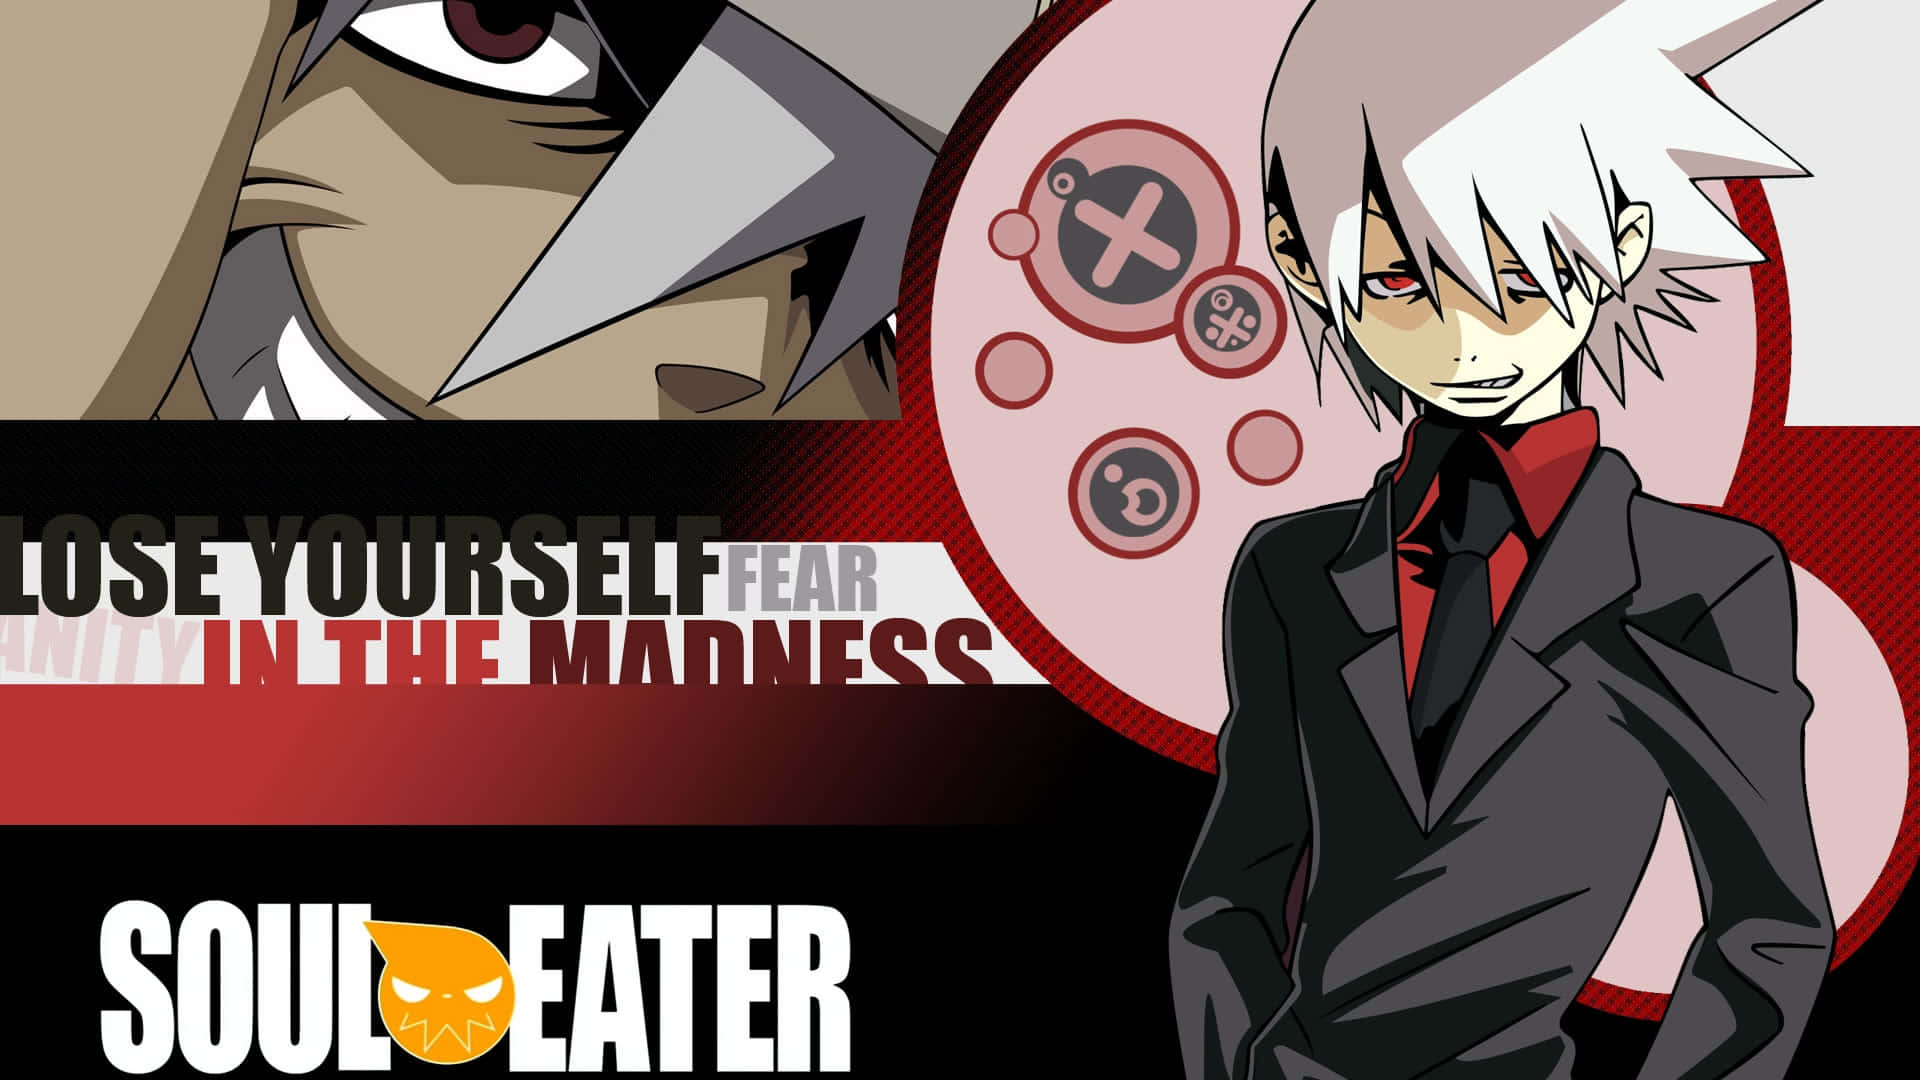 Enjoy the action and adventure of the Soul Eater Manga! Wallpaper